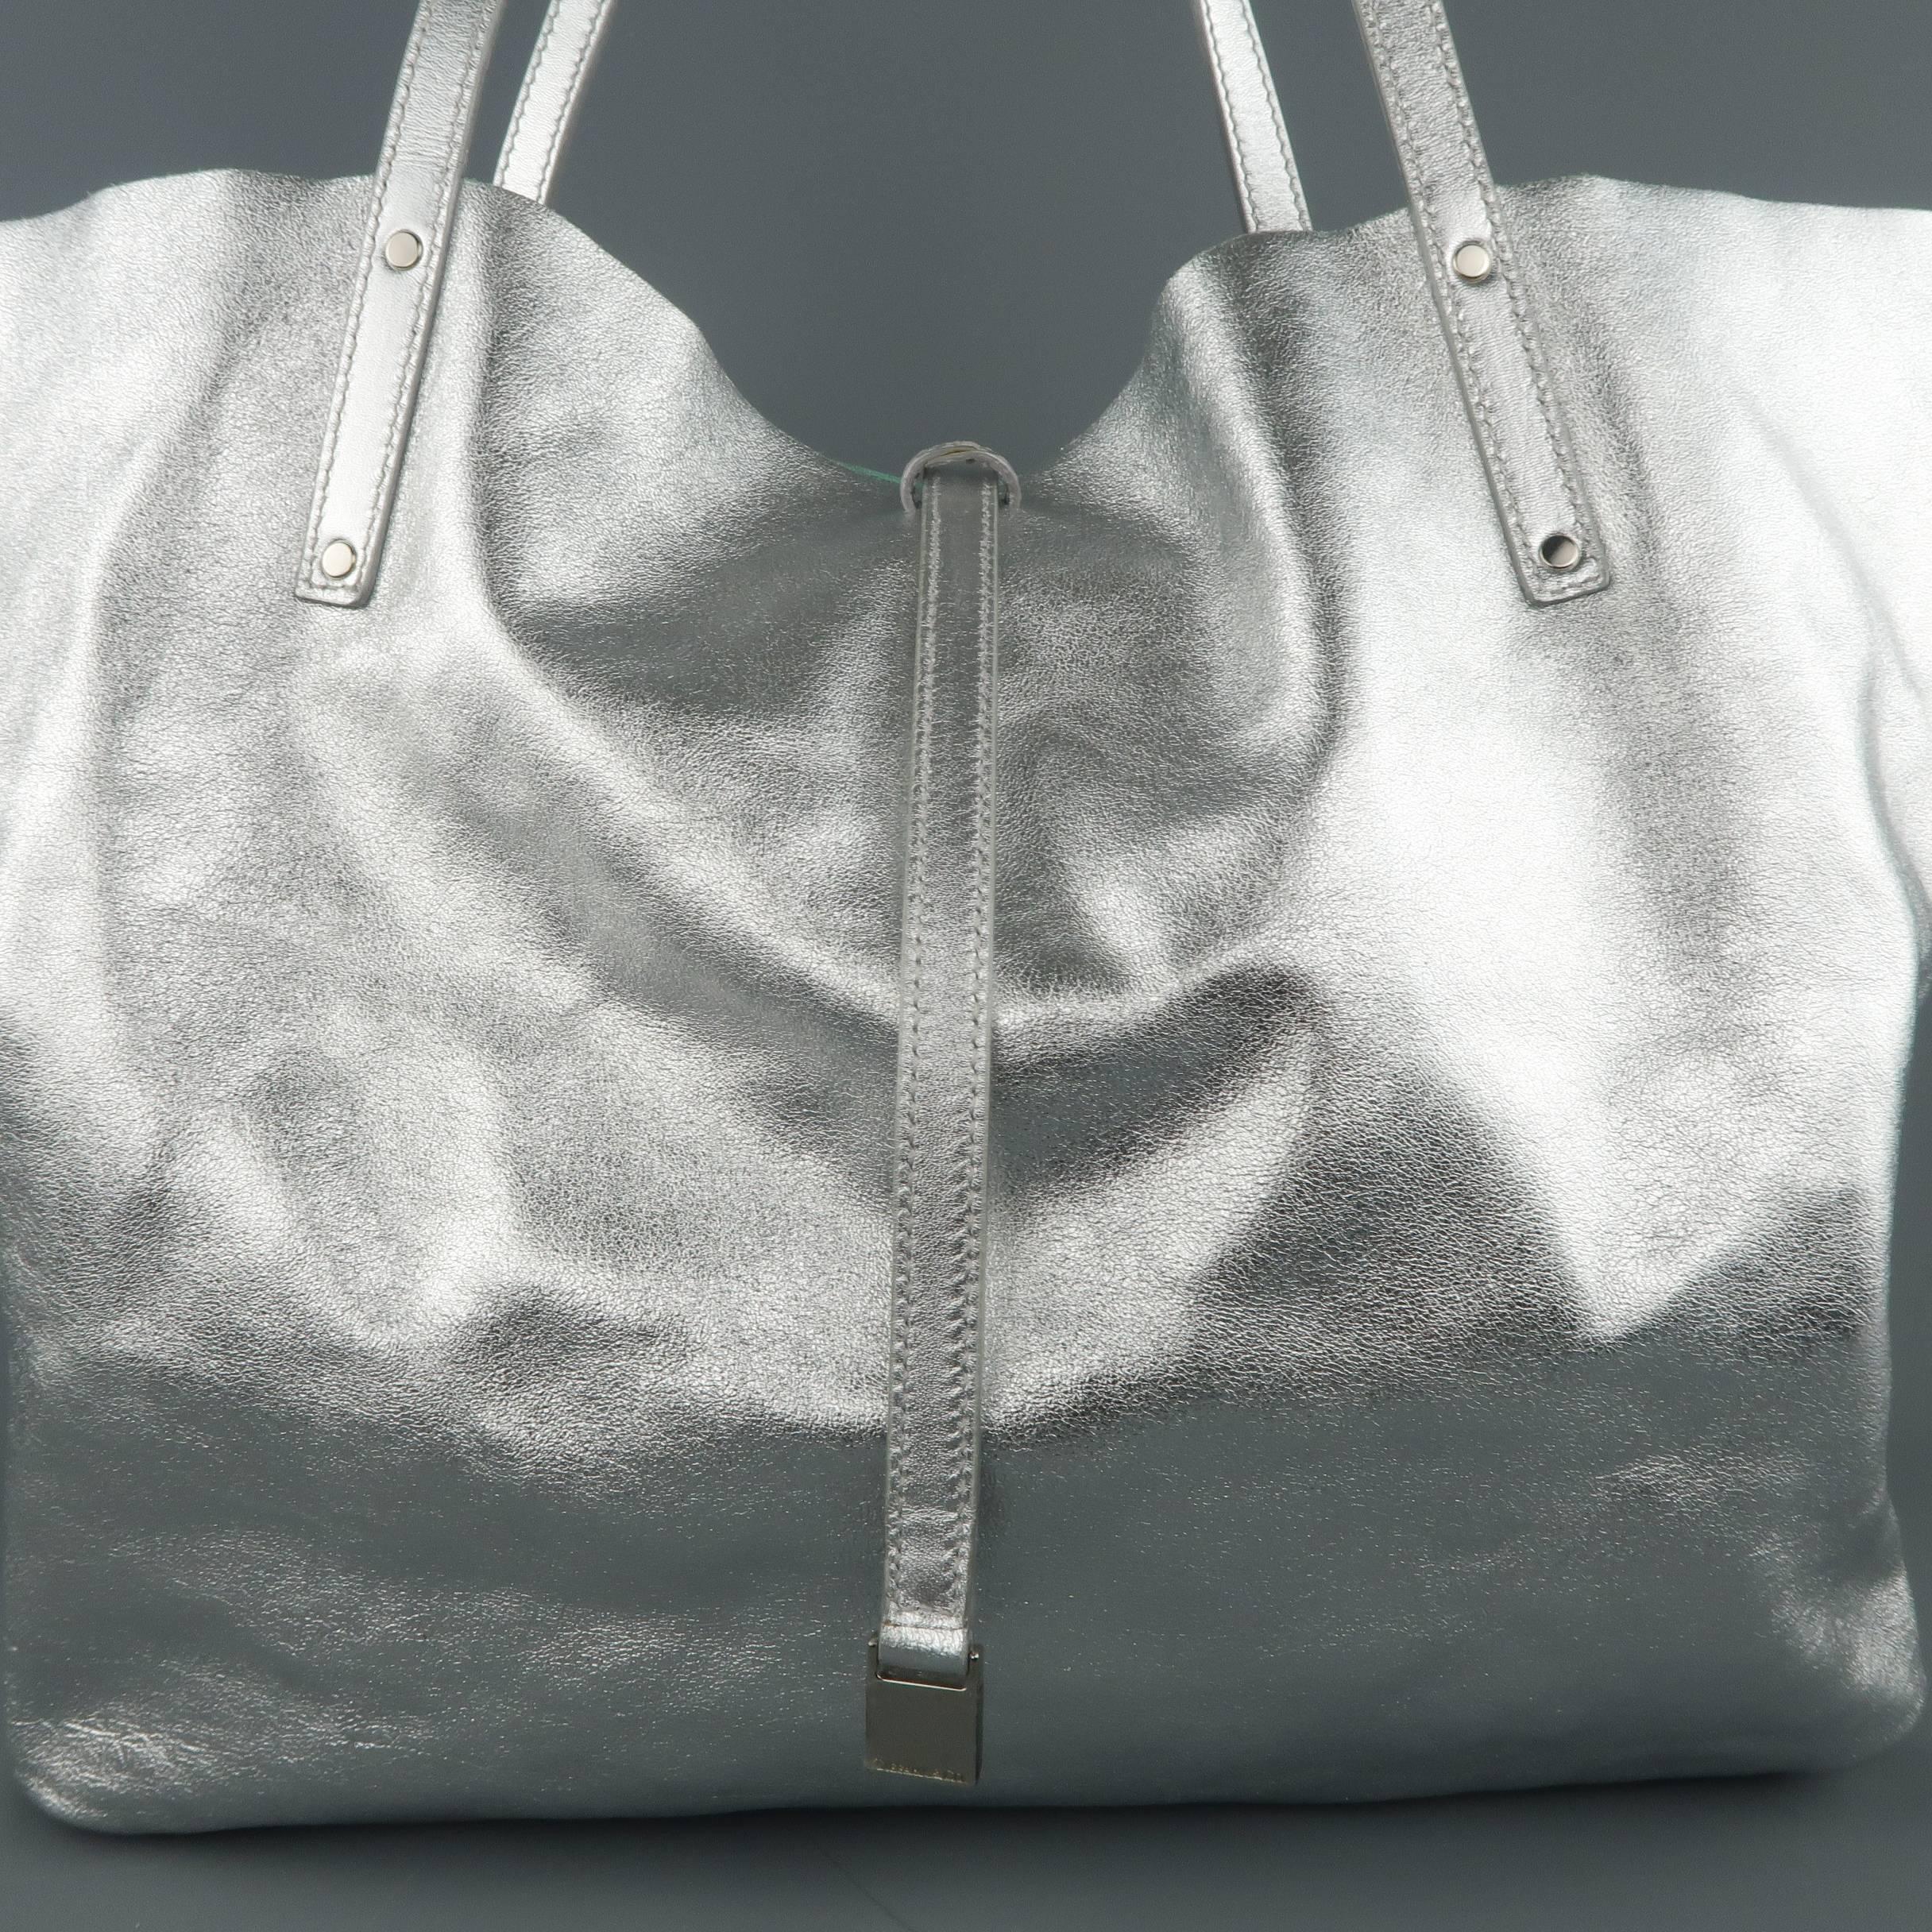 TIFFANY & CO. shopper tote bag comes in a metallic textured silver leather with double top handles, enamel logo hardware, and pull through top closure with reverse 